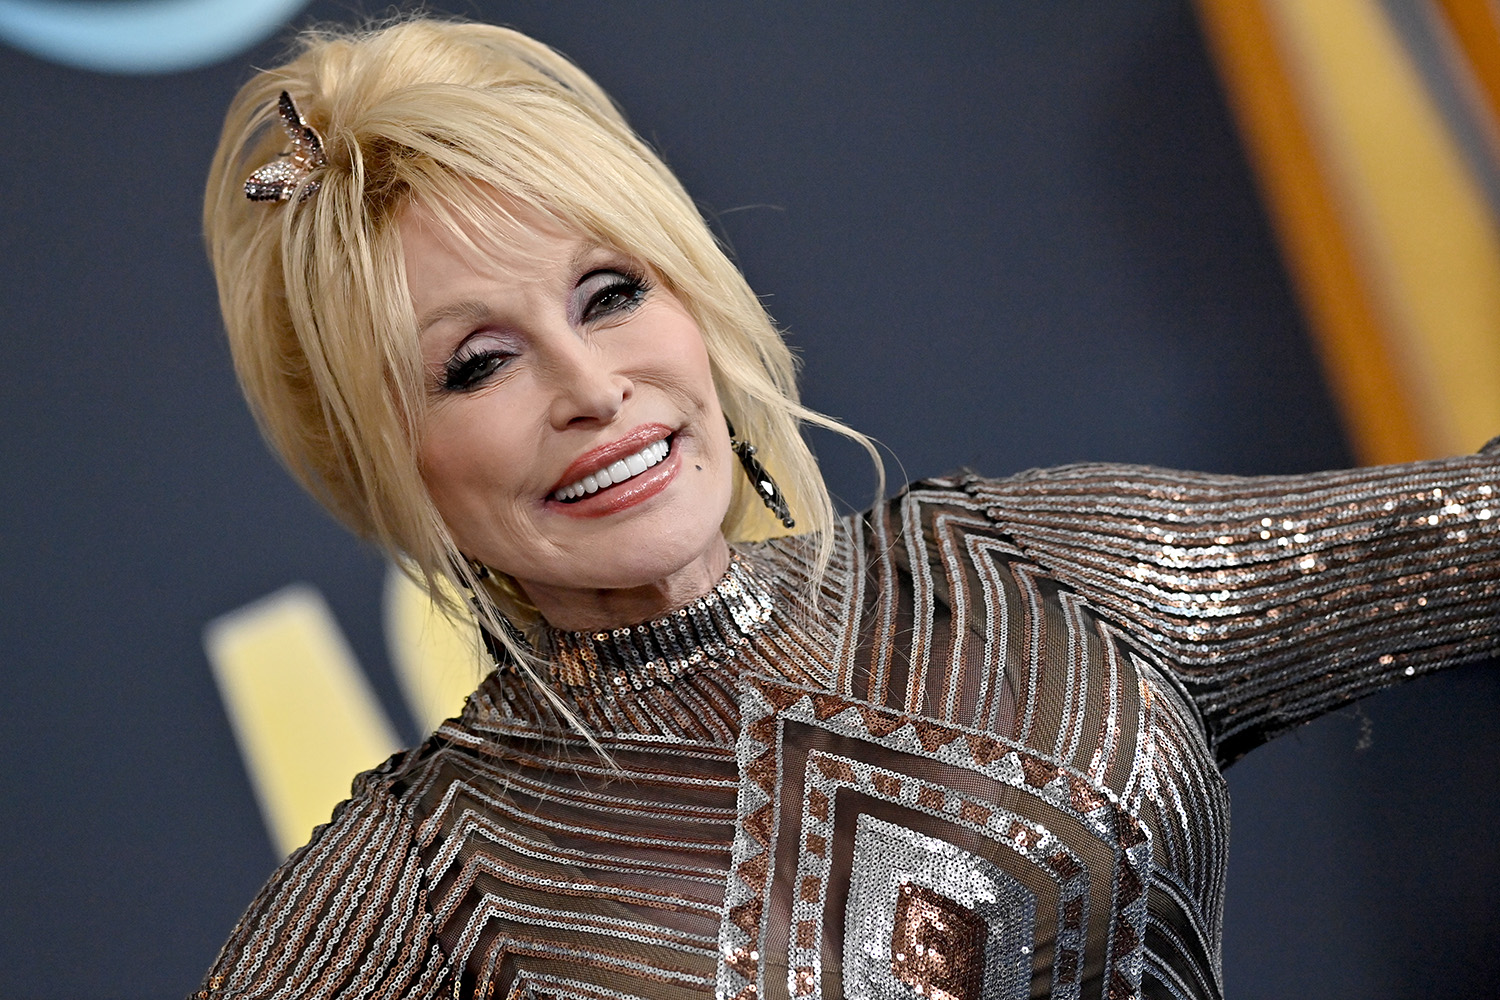 Dolly Parton, who has just turned down the Rock & Roll Hall of Fame.